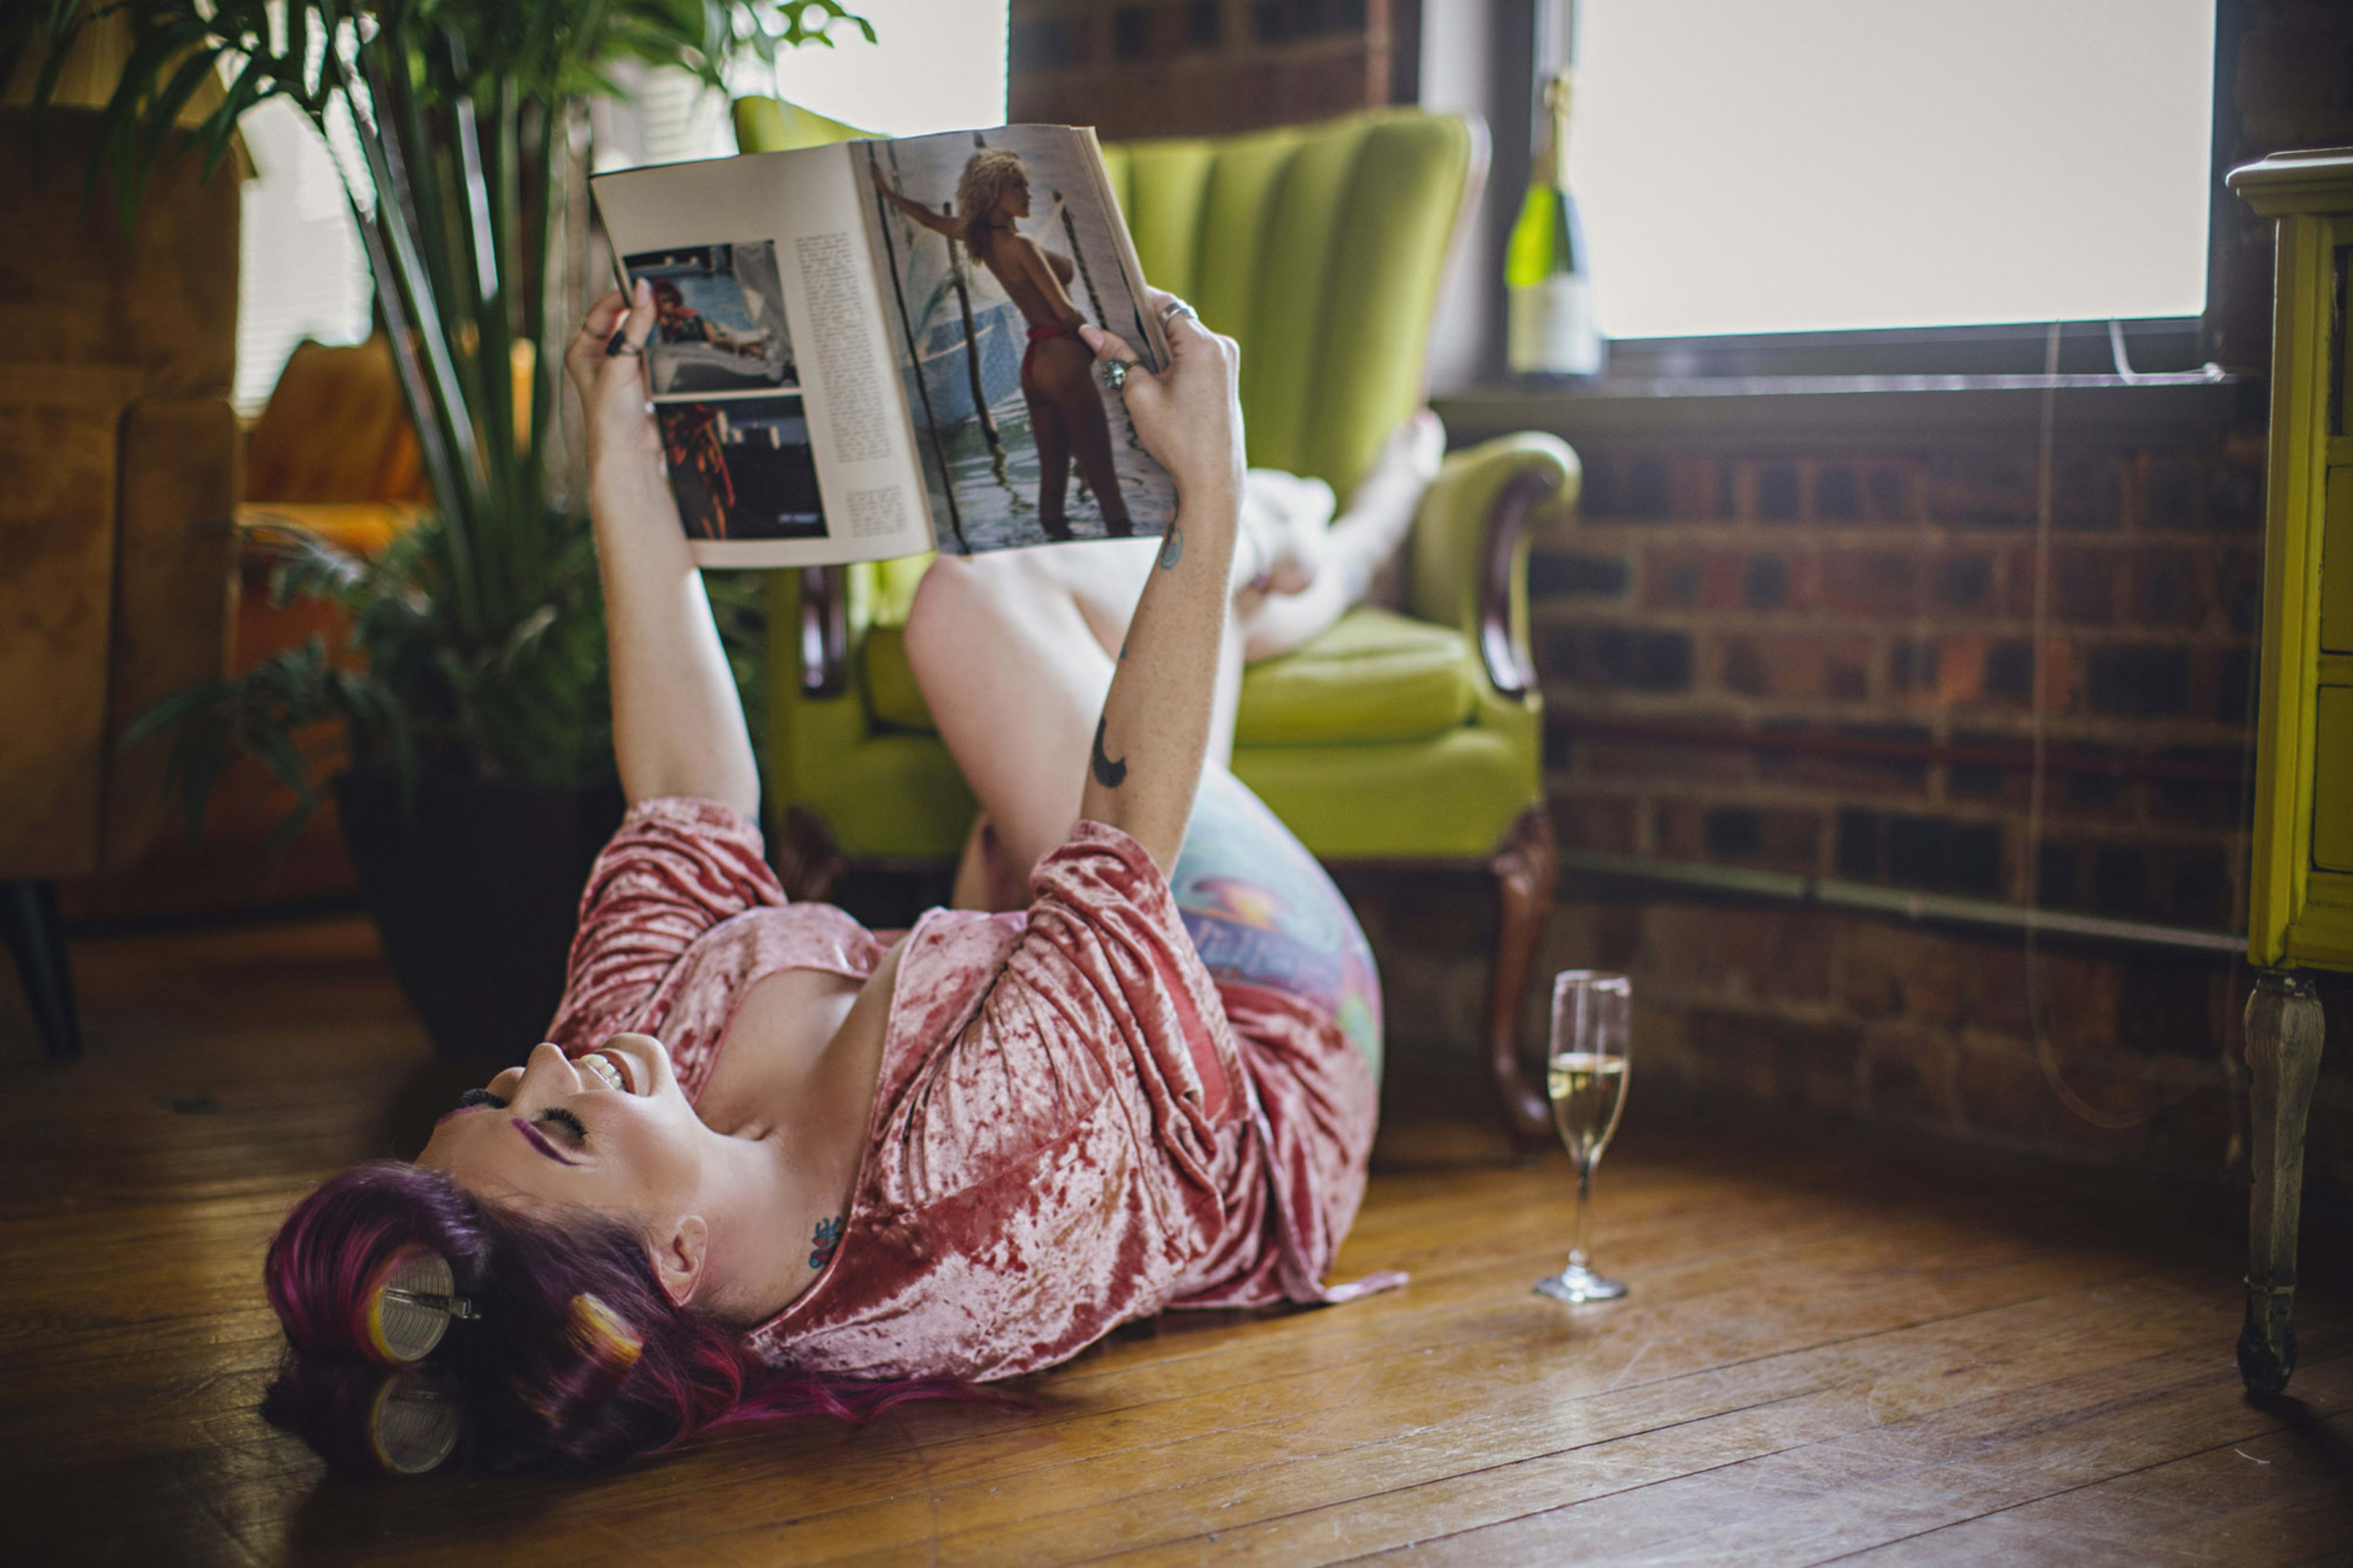 A woman lounging on a rustic brown floor amidst green plants, engrossed in a magazine.